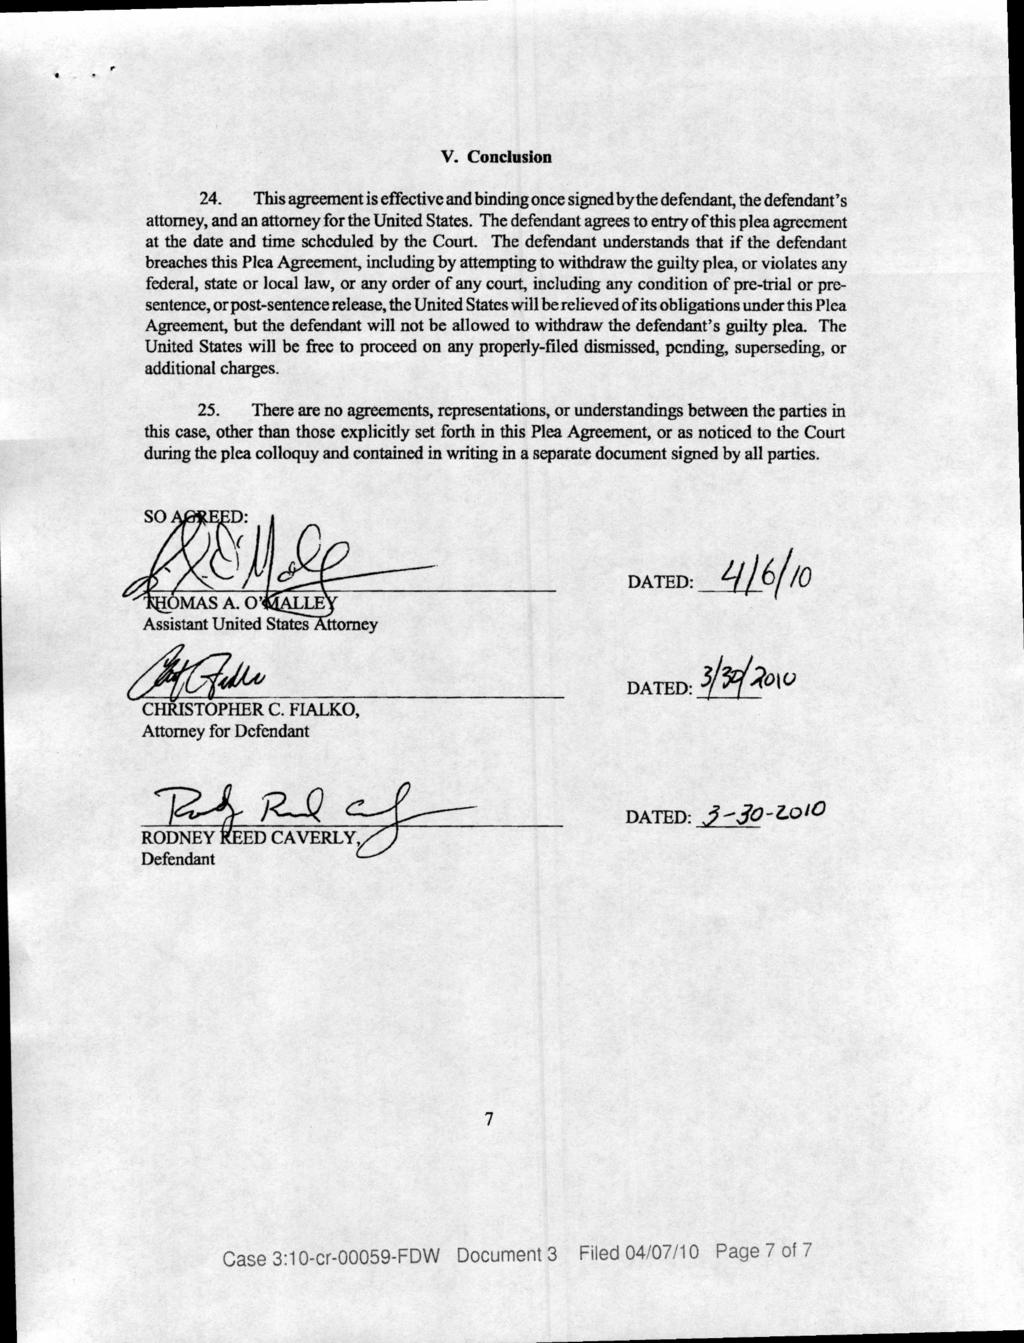 V. Conclusion 24. This agreement is effective and binding once signed by the defendant, the defendant's attorney, and an attorney for the United States.